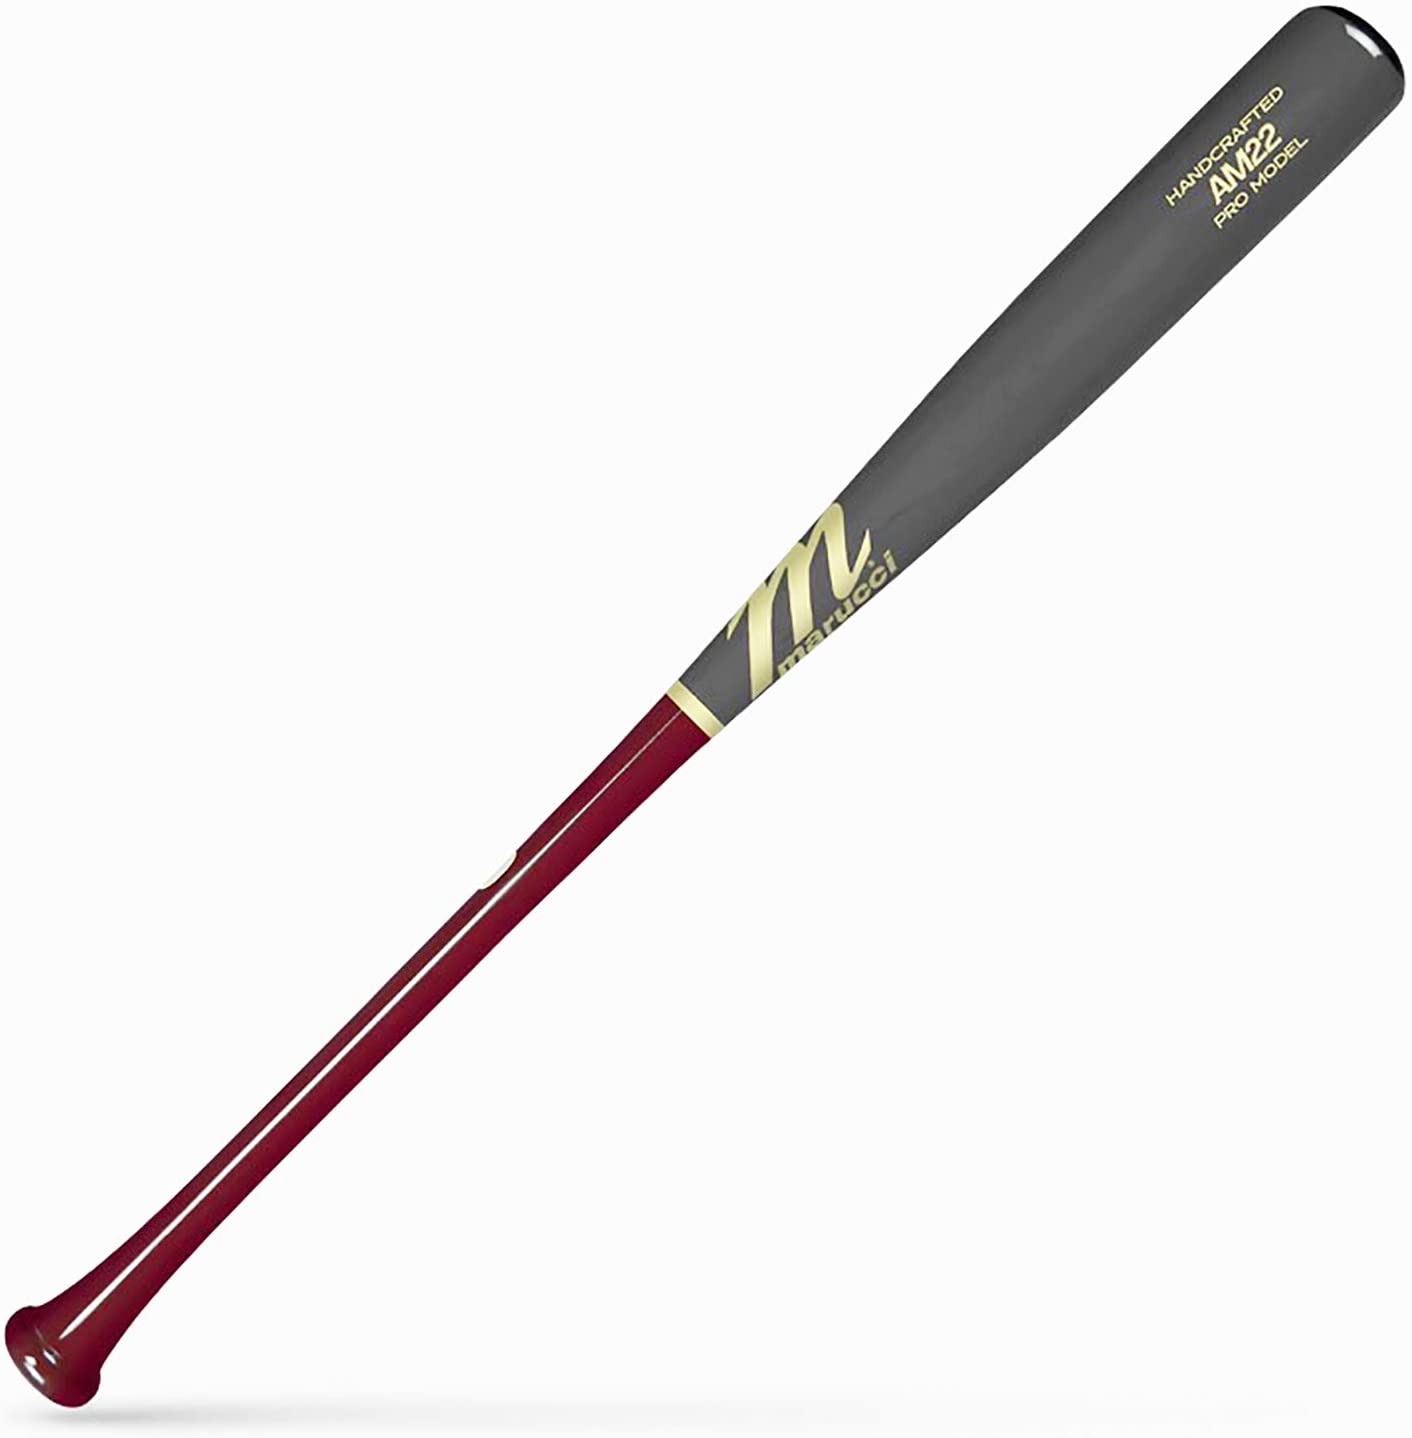 Hit for average Hit for power The AM22 Pro Model wood bat allows you to control both with authority. This maple baseball bat features a thick tapered knob and handle to balance out the wrath of a large, explosive barrel.